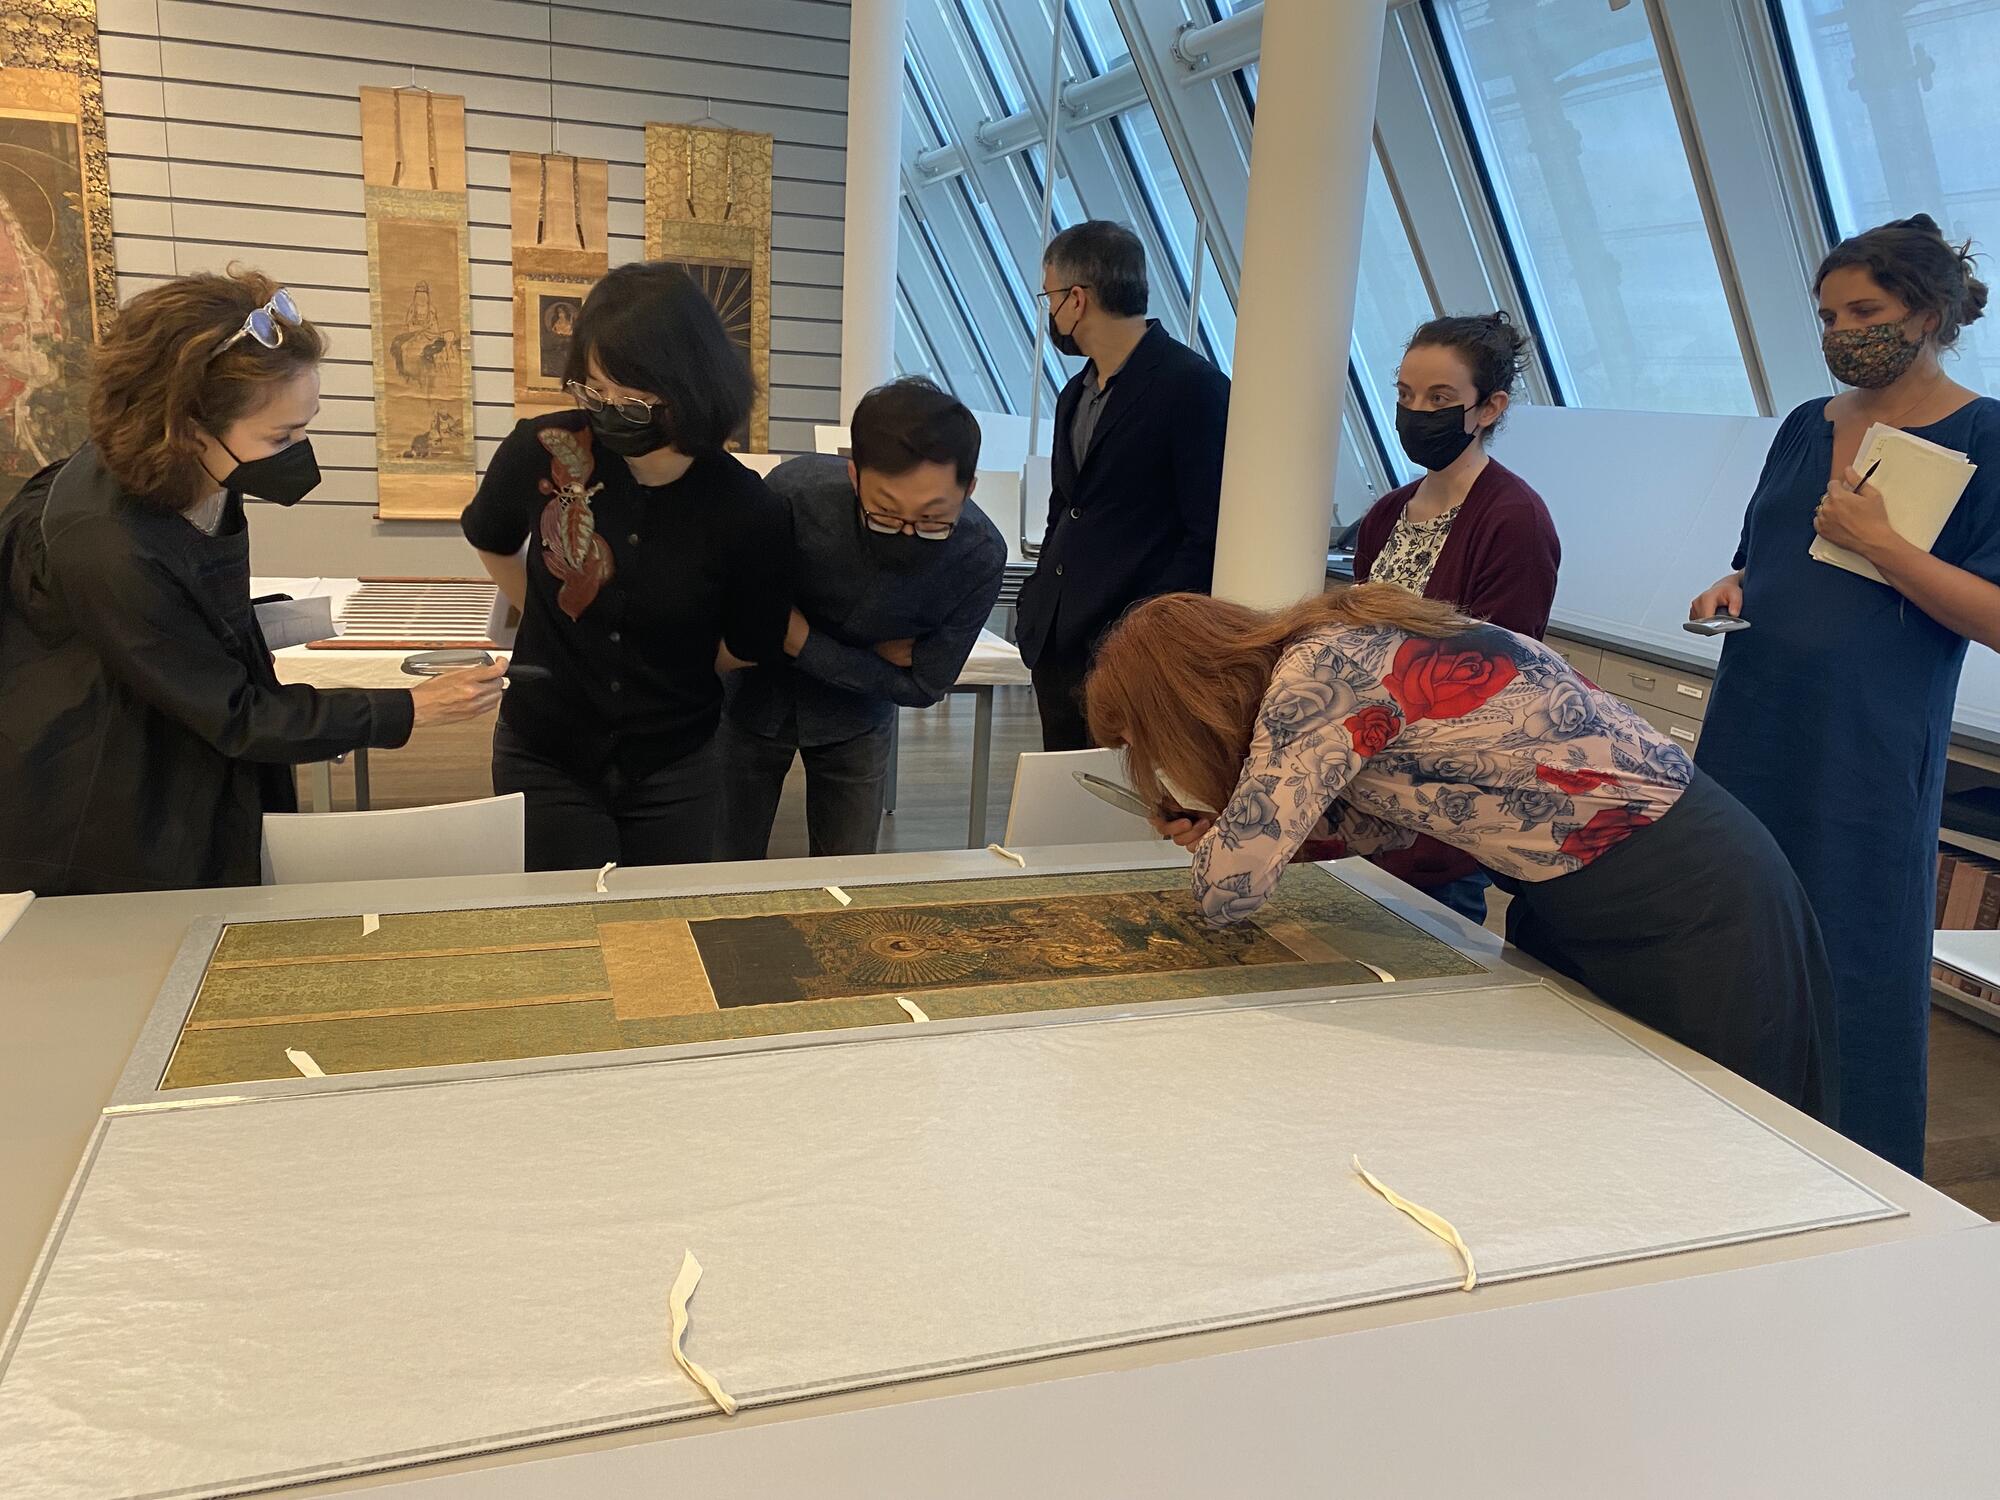 Several people look closely at a textile image on a table